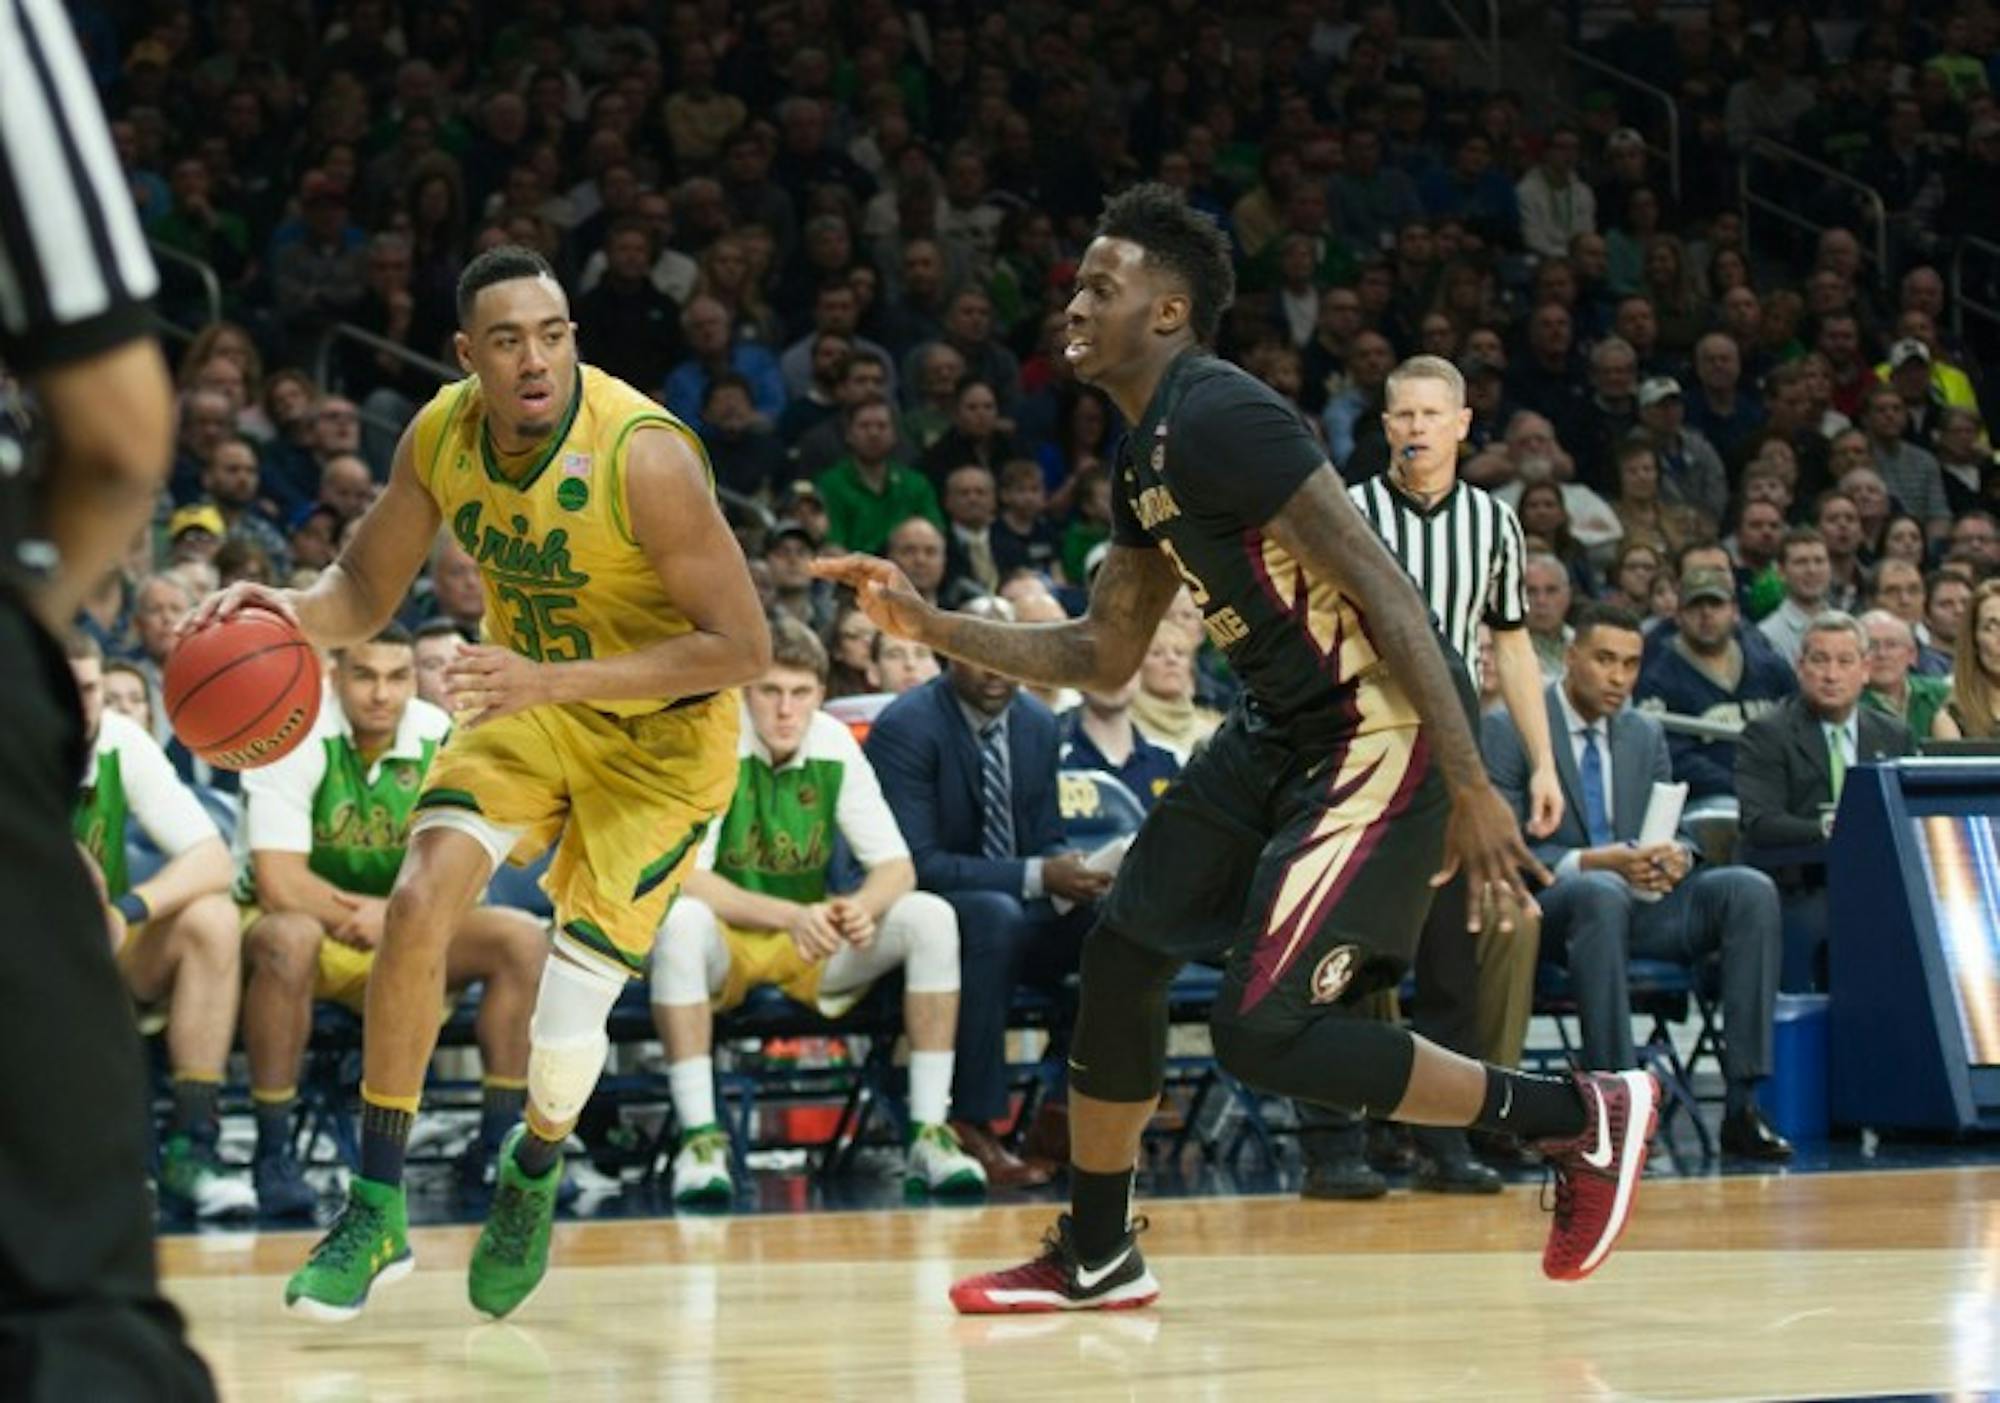 Irish junior forward Bonzie Colson looks to score against a Florida State defender during Notre Dame's 84-72 victory over the Seminoles on Saturday at Purcell Pavilion. Colson had a career-high 33 points in the game.